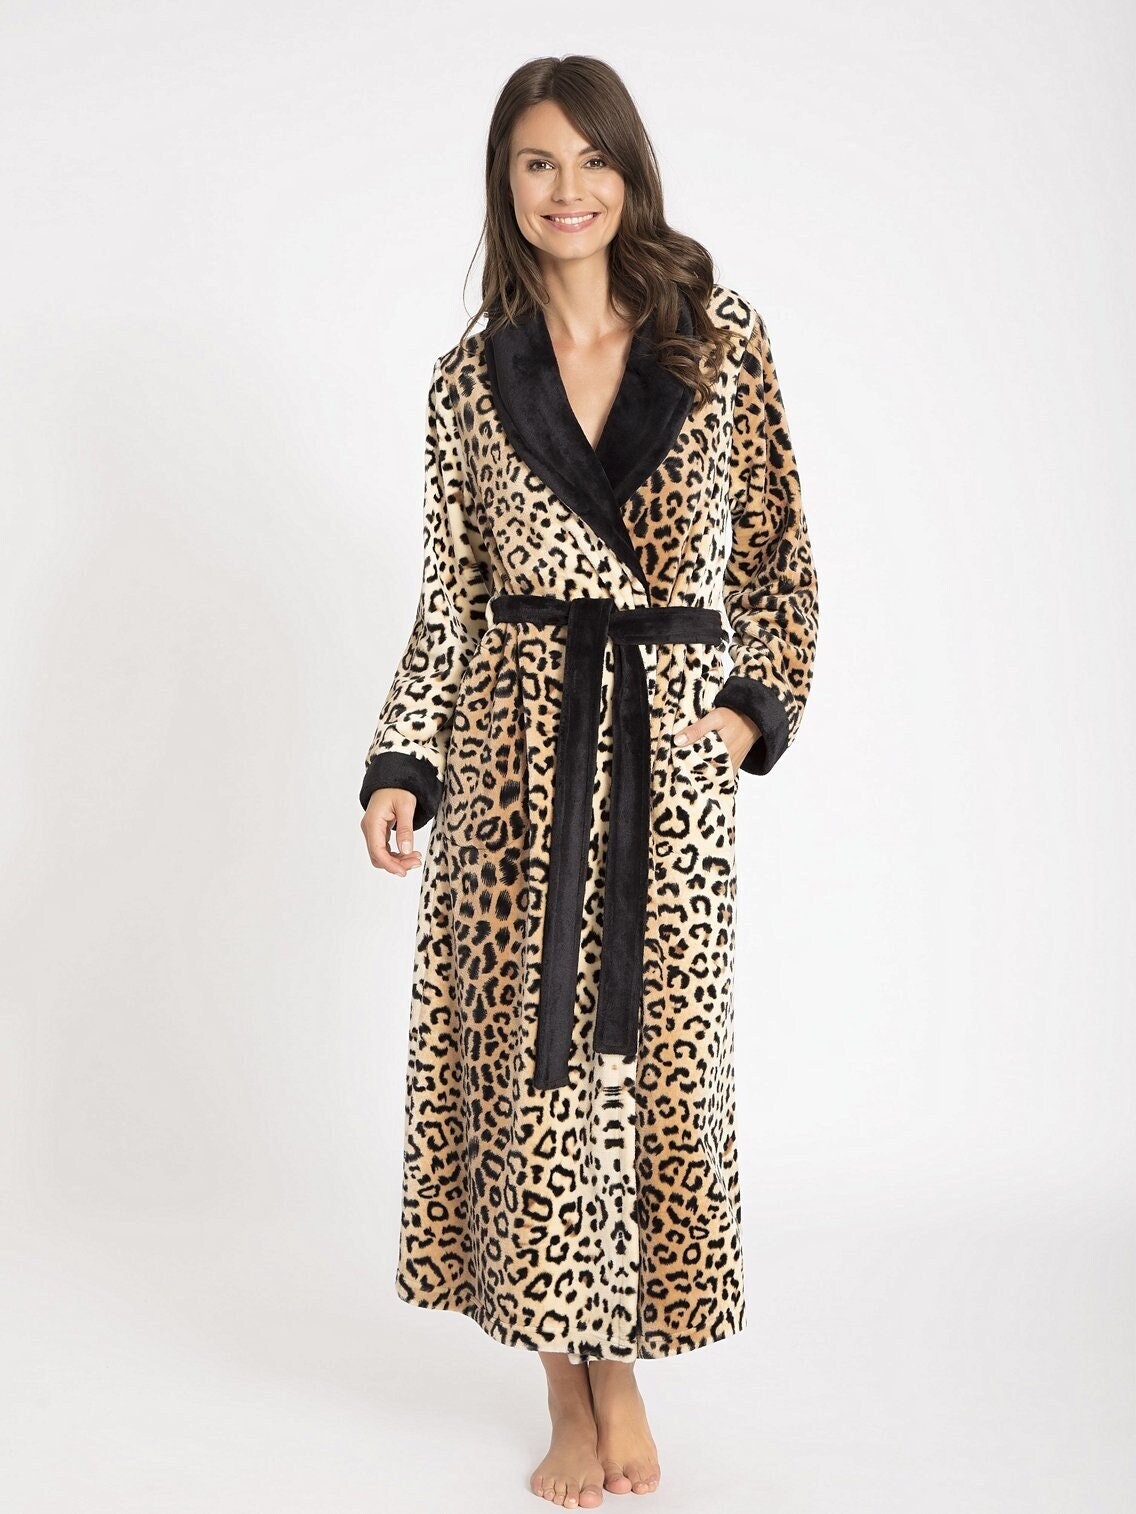 Leopard Print Gifts Leopard Print Bridesmaid Robes Bachelorette Party Robes  Leopard Print Robes Monogrammed Trendy Gifts for Women EB3376M 